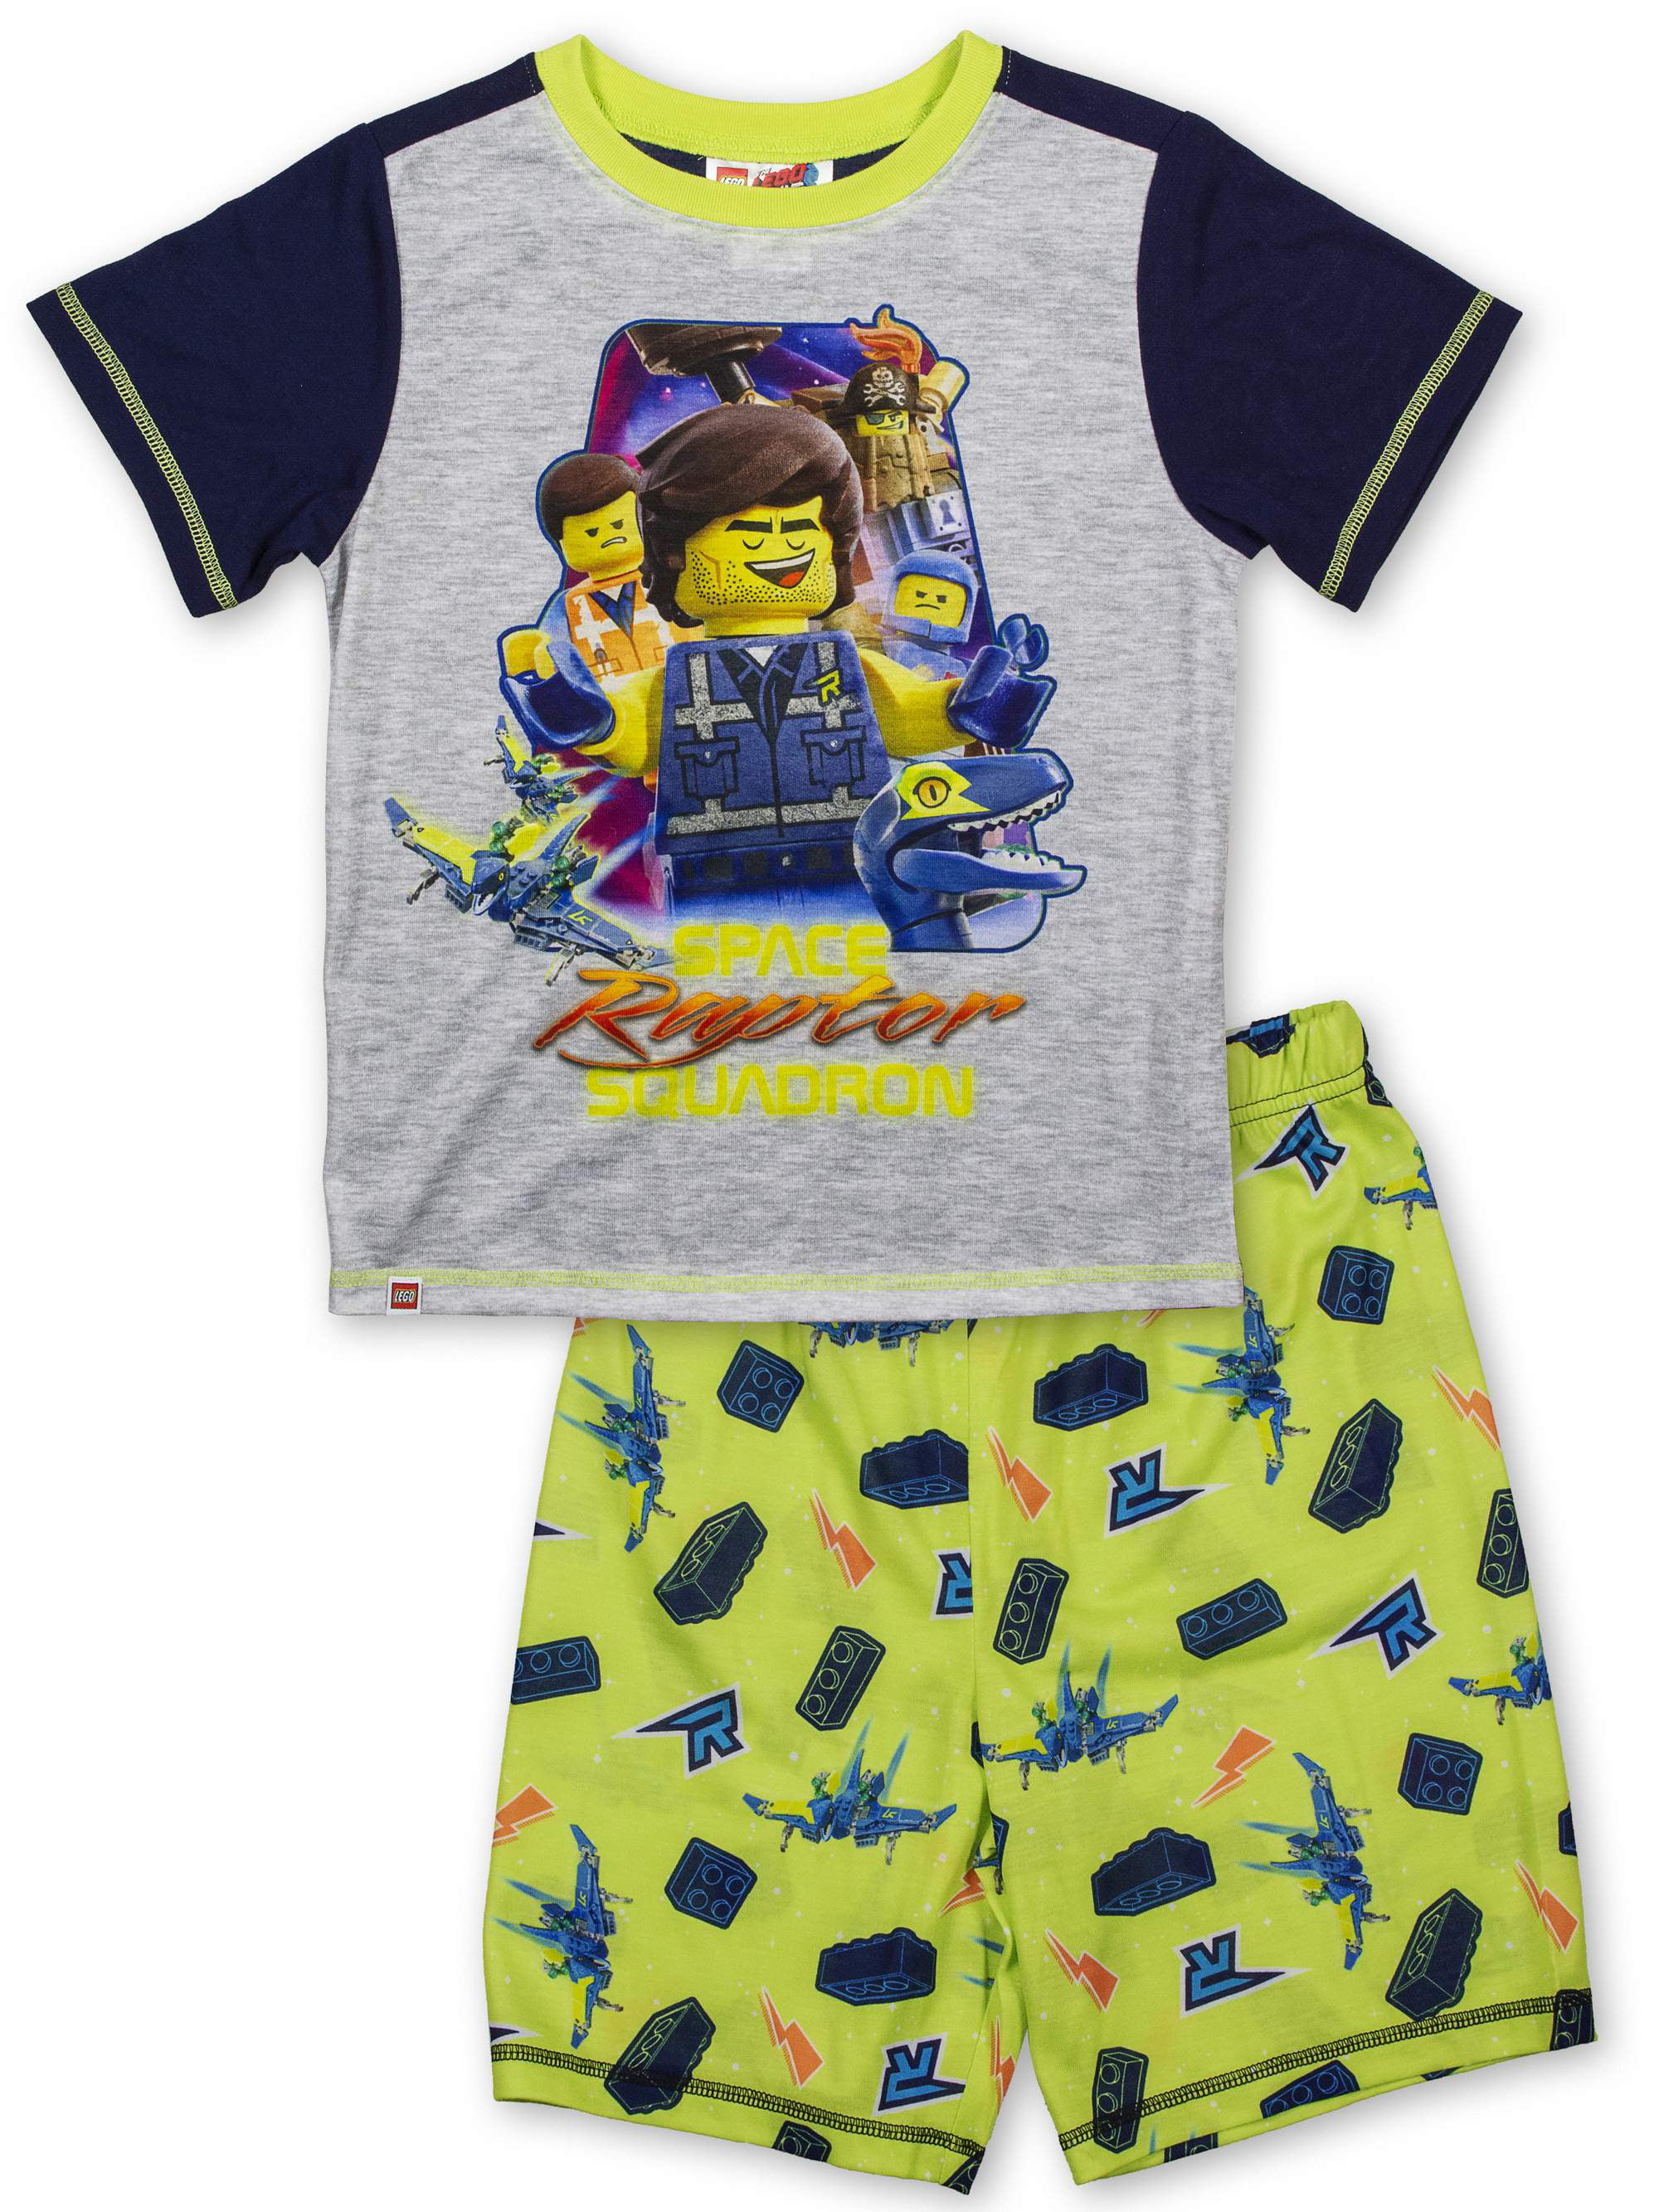 Details about   The Lego Movie 2 Boys Two-Piece Pajama Short Set Size 4/5 6/7 8 10/12 